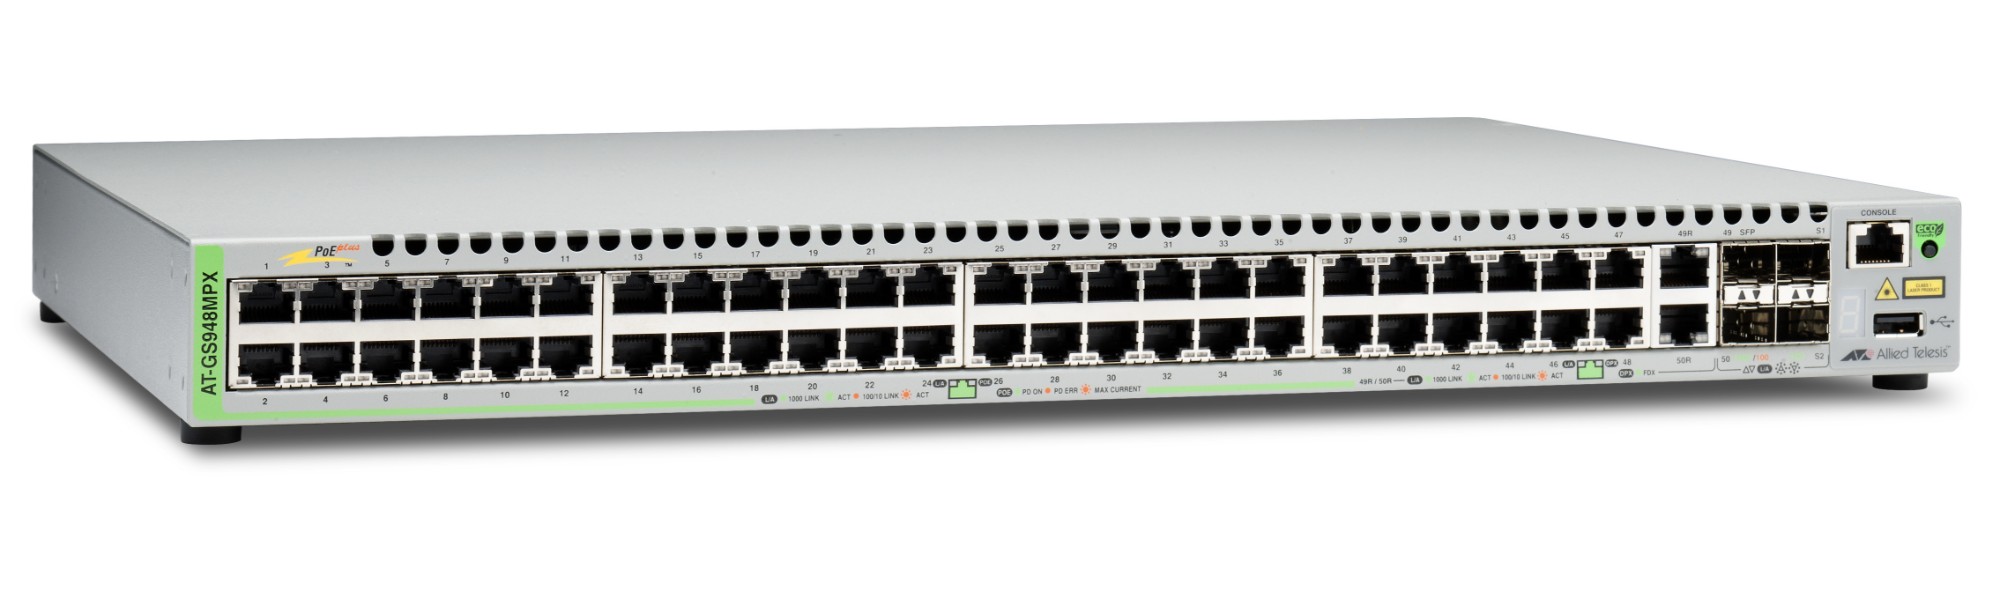 Allied Telesis AT-GS948MPX-50 Managed L3 Gigabit Ethernet (10/100/1000) Grey Power over Ethernet (PoE)